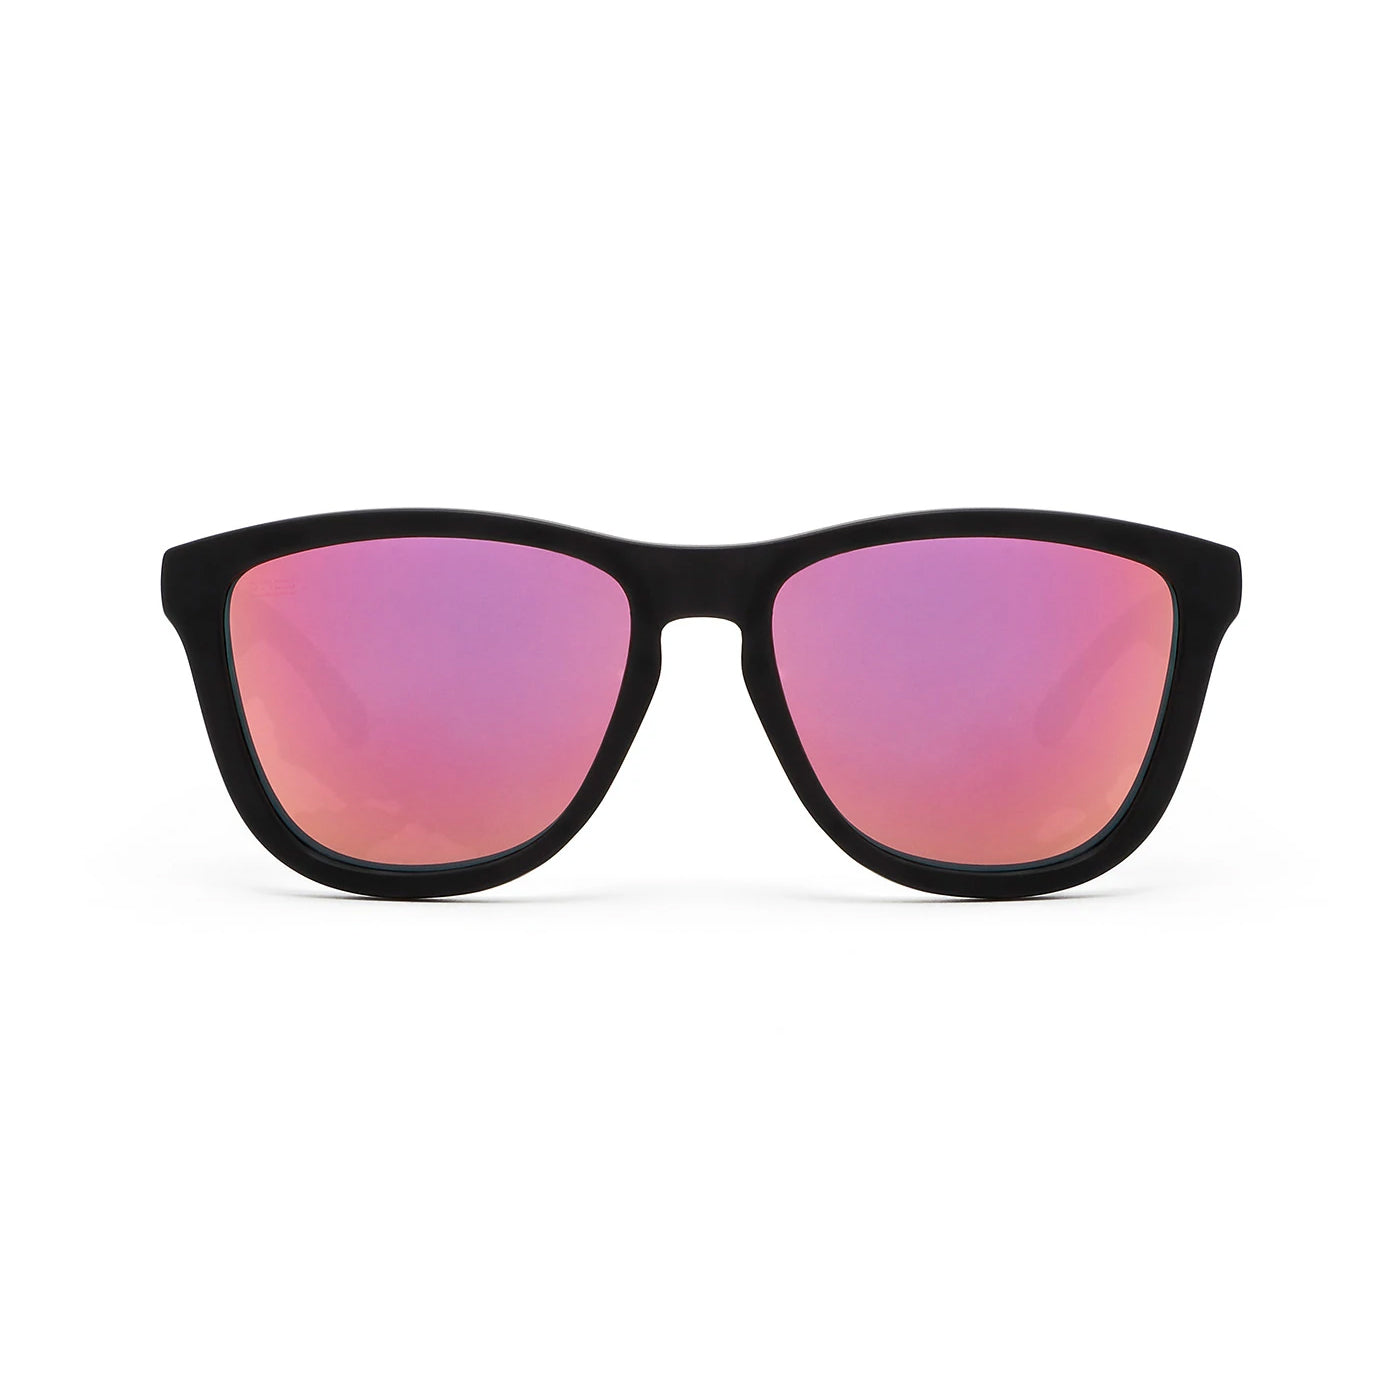 HAWKERS - ONE Carbon Black Nebula For Men and Women UV400